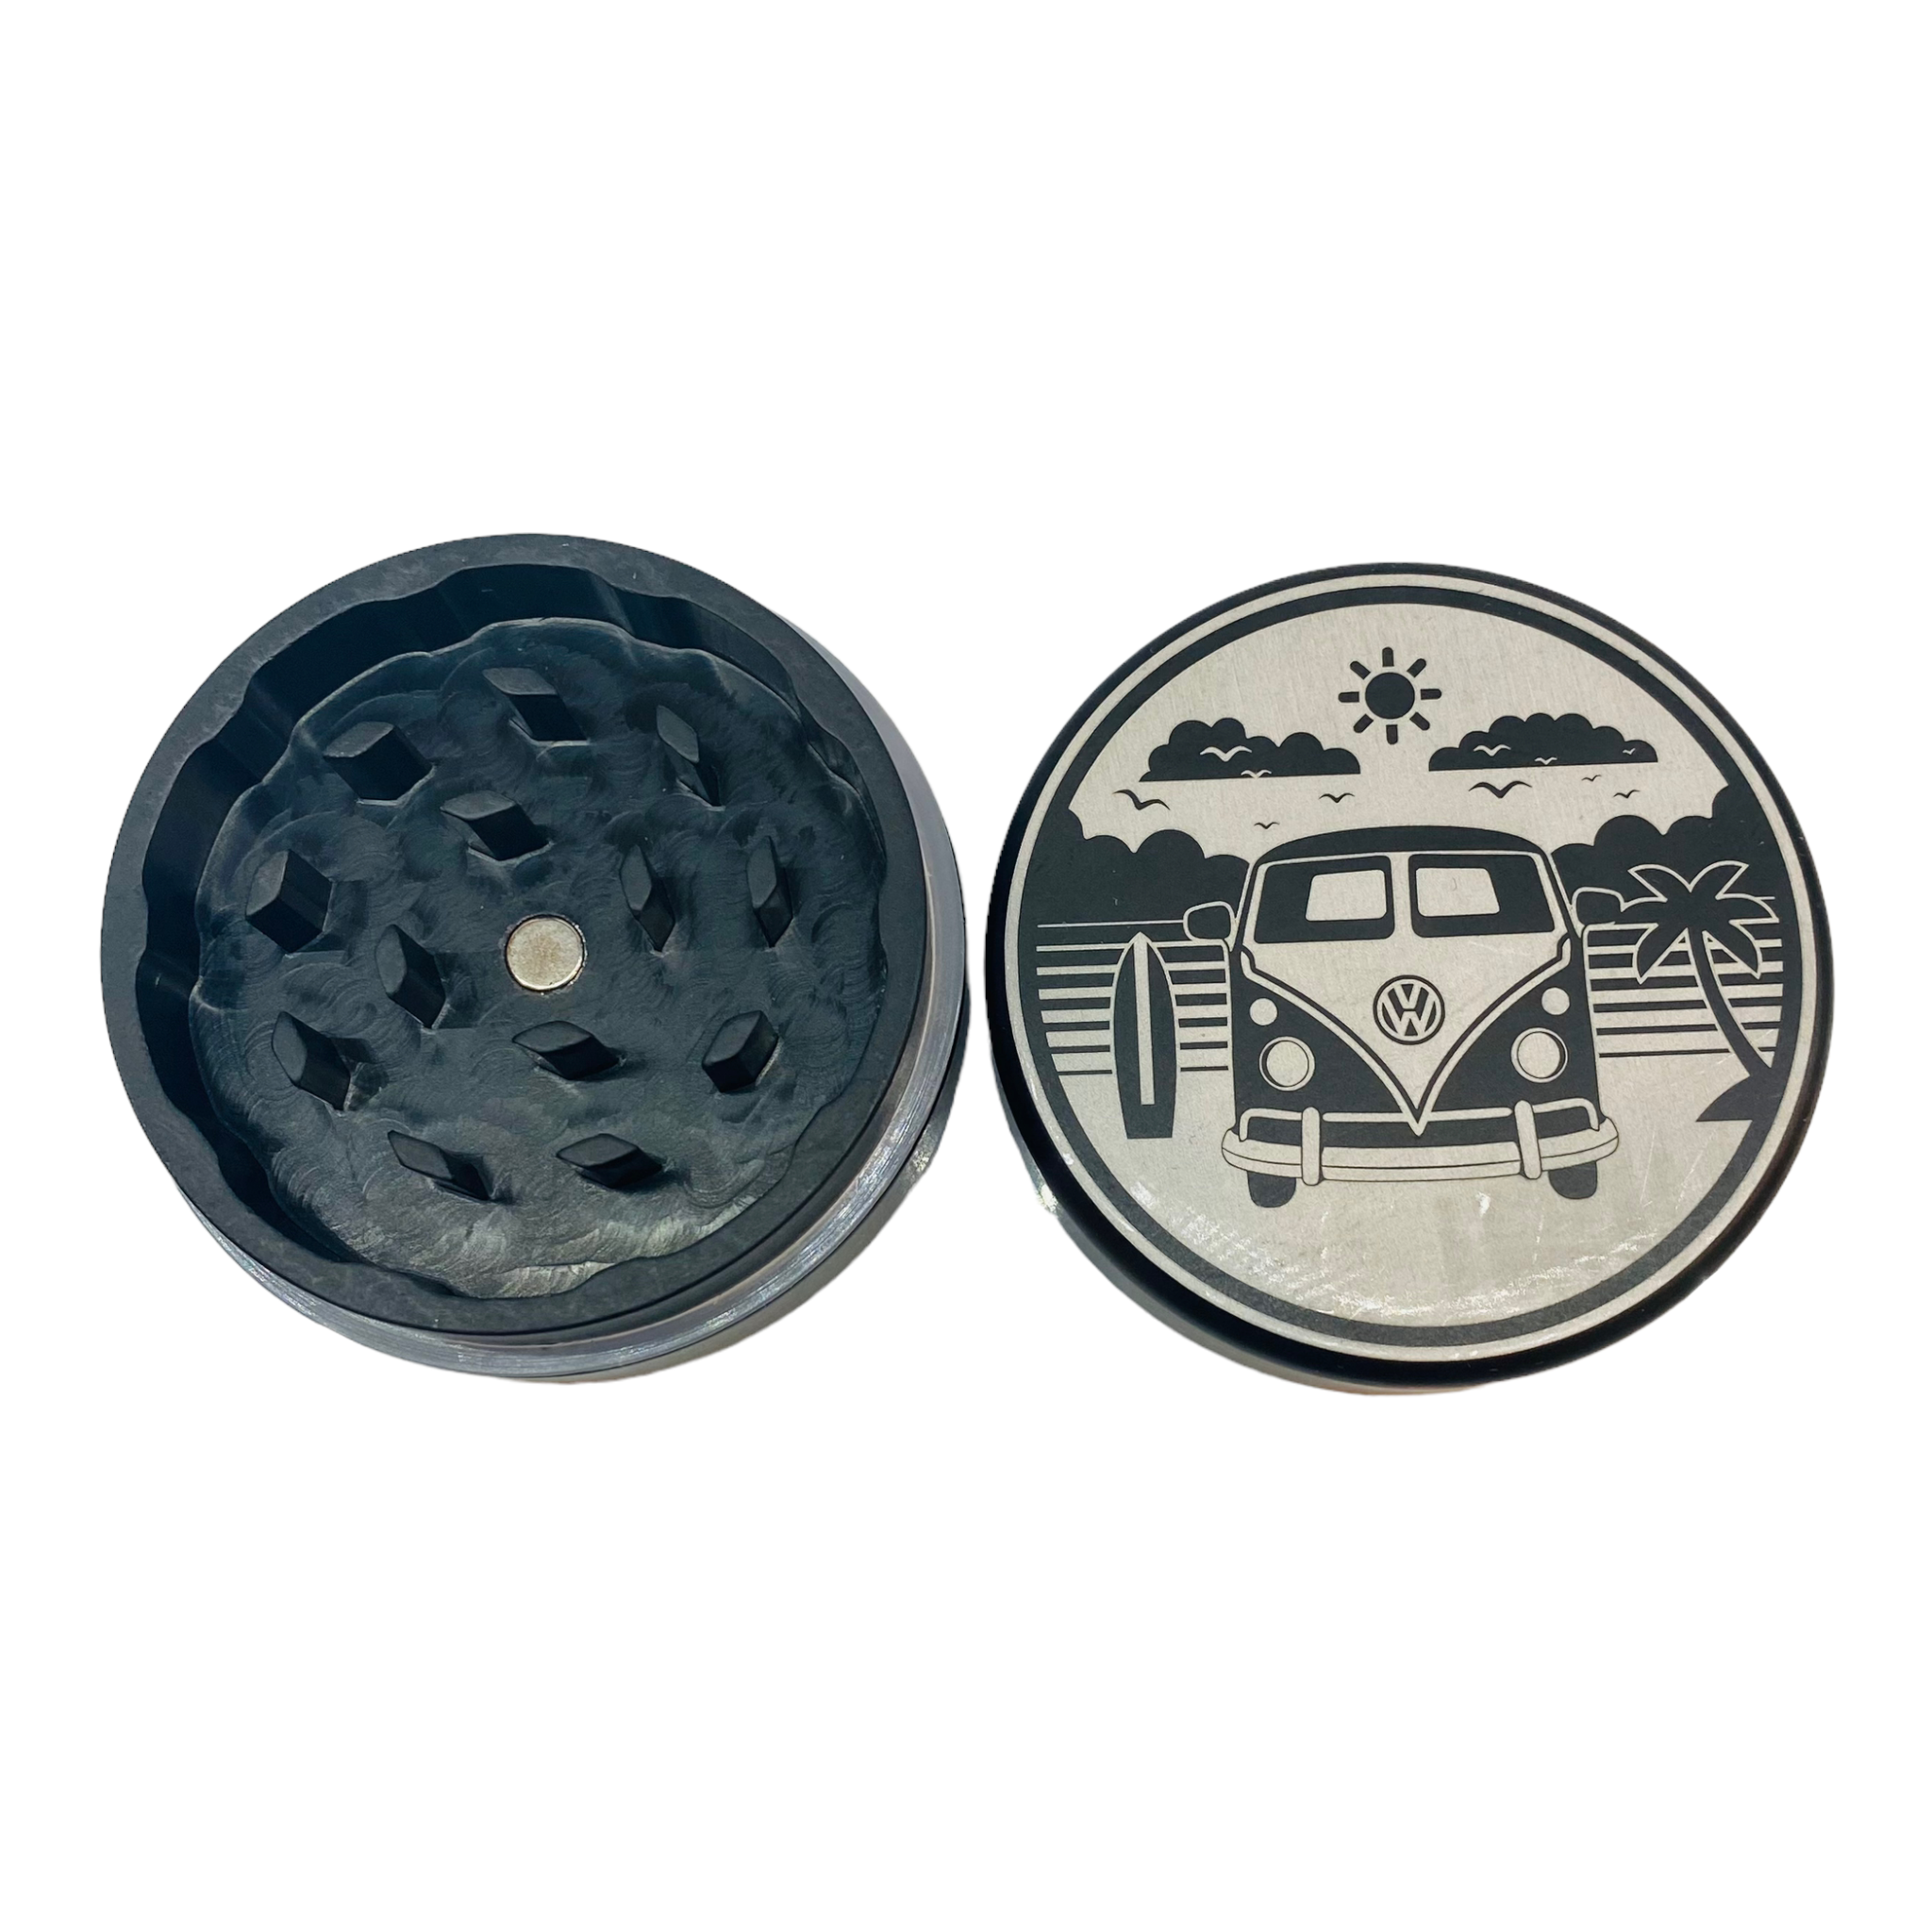 Tahoe Grinders - Black Anodized Aluminum Large Two Piece Herb Grinder With VW Bus On Beach